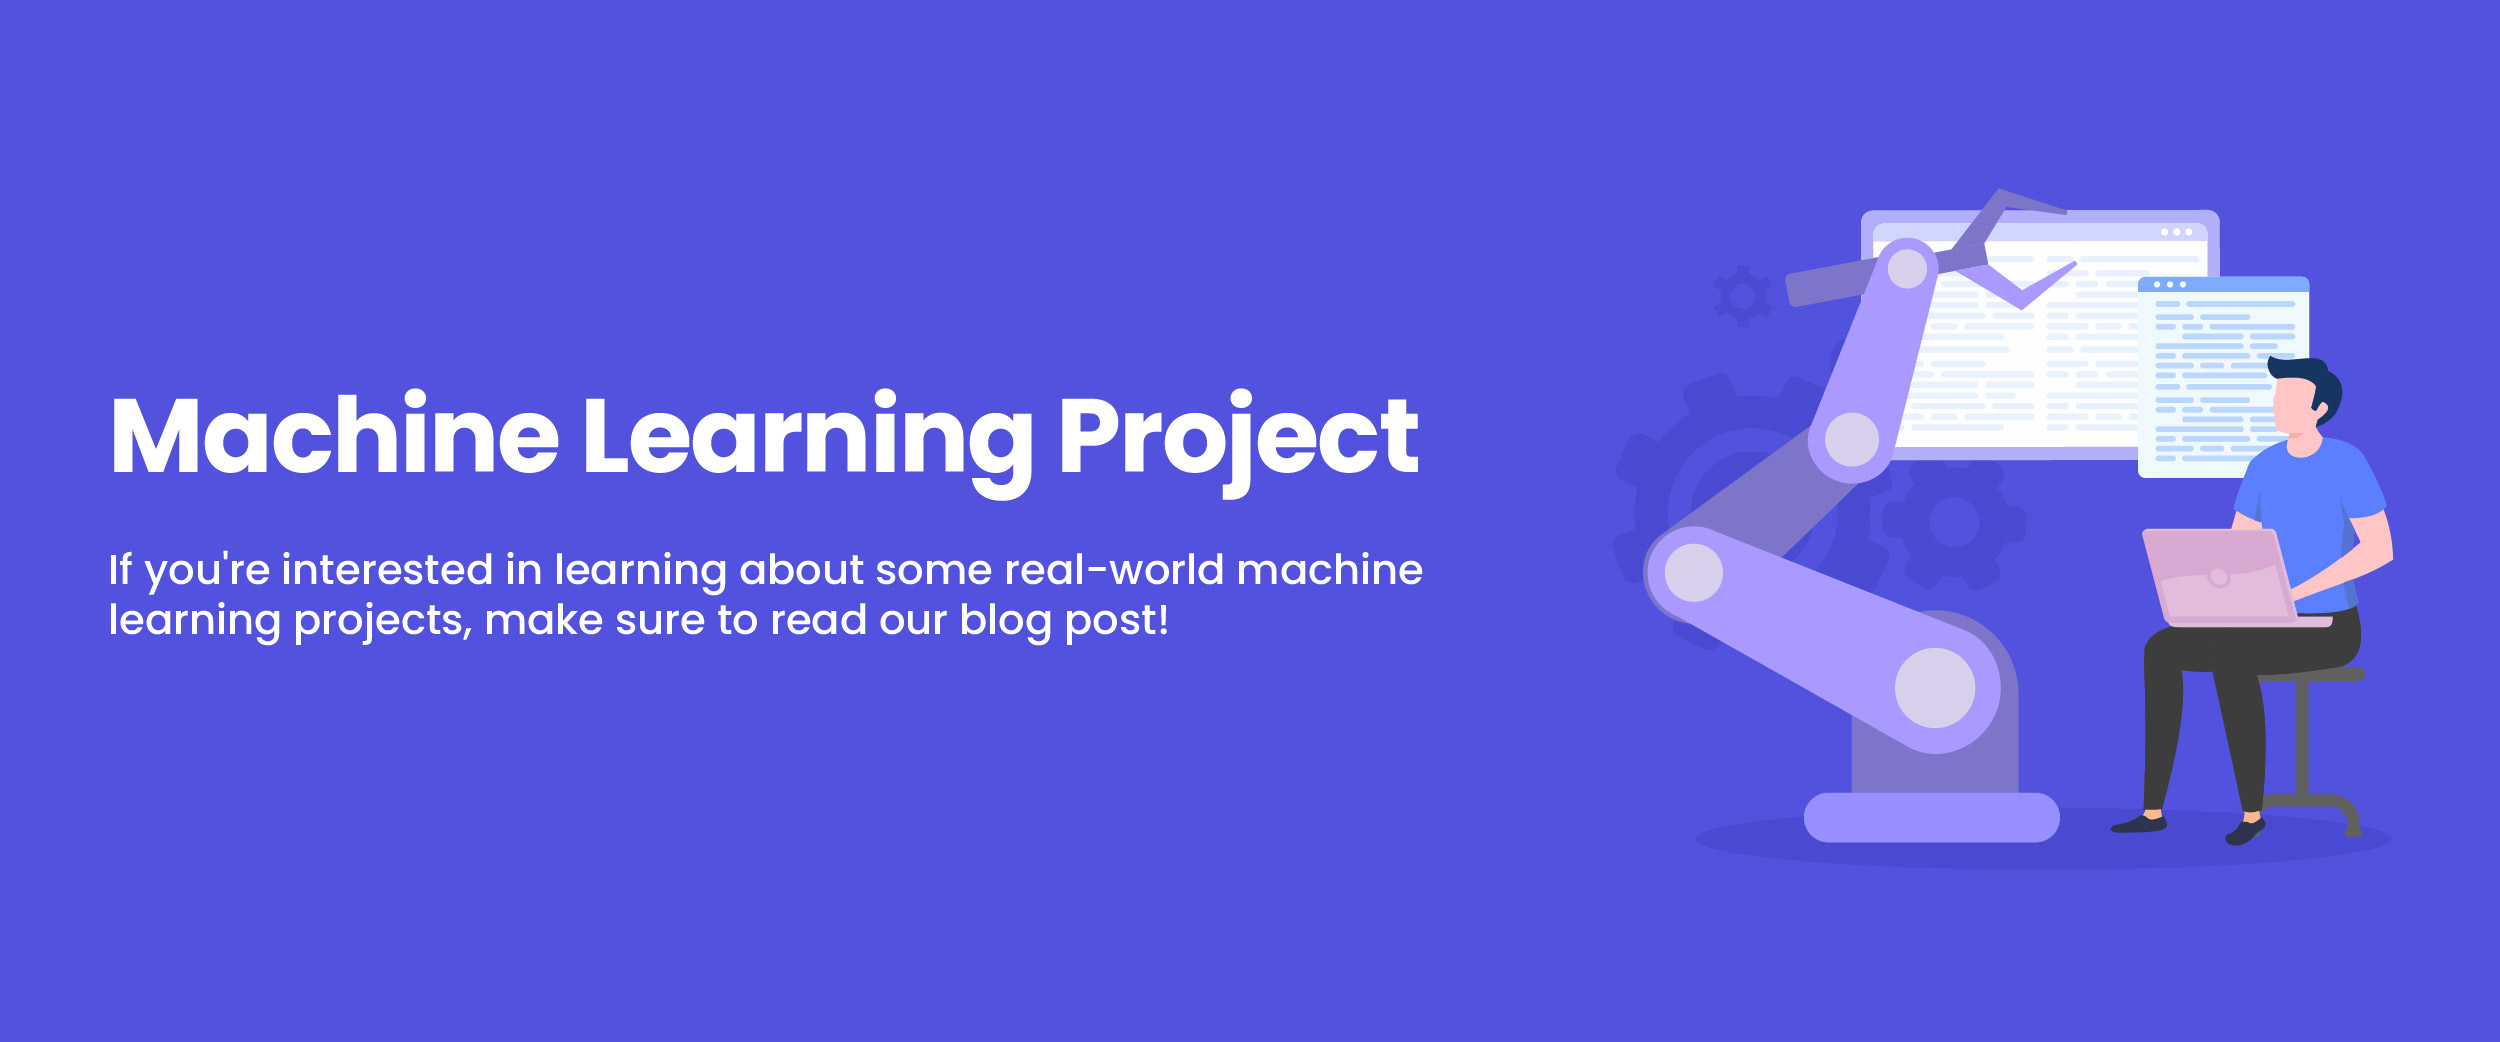 machine learning projects